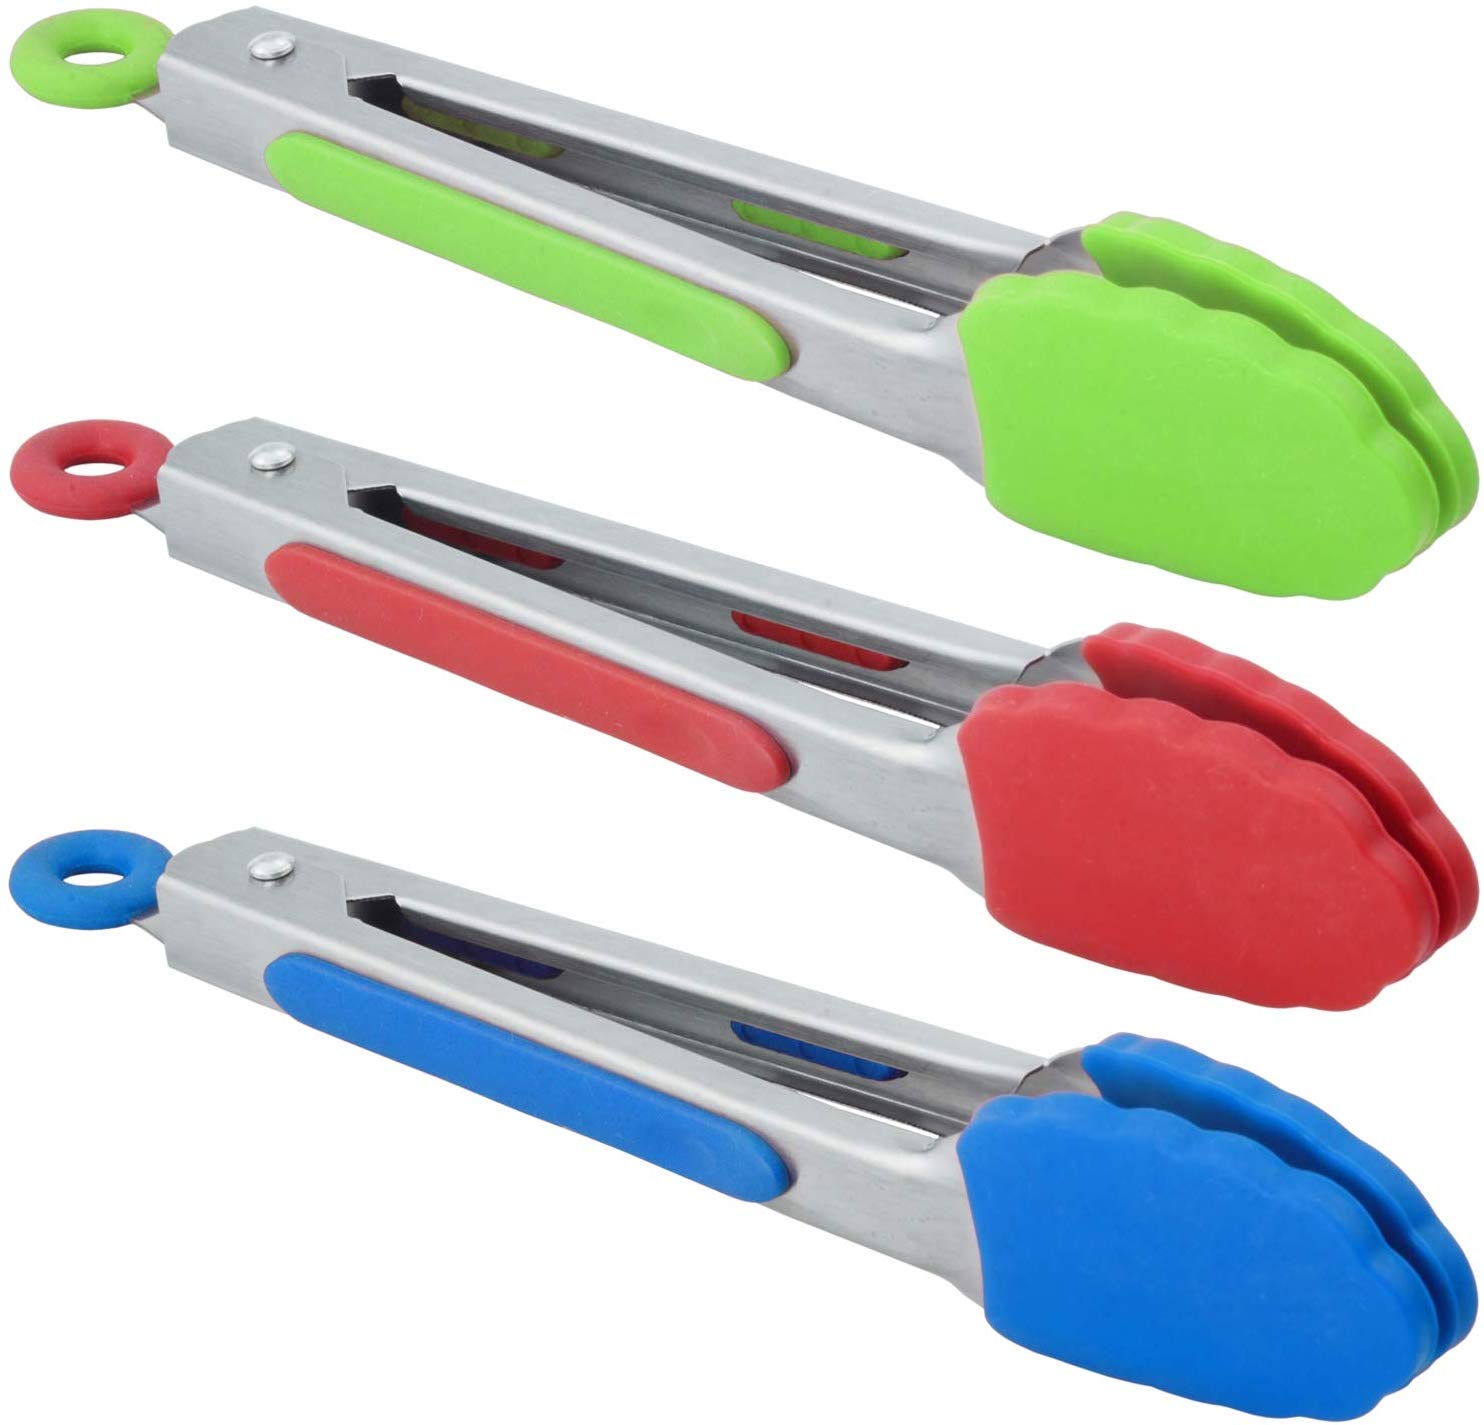  7-Inch Tongs Set of 3 (Red Blue Green)